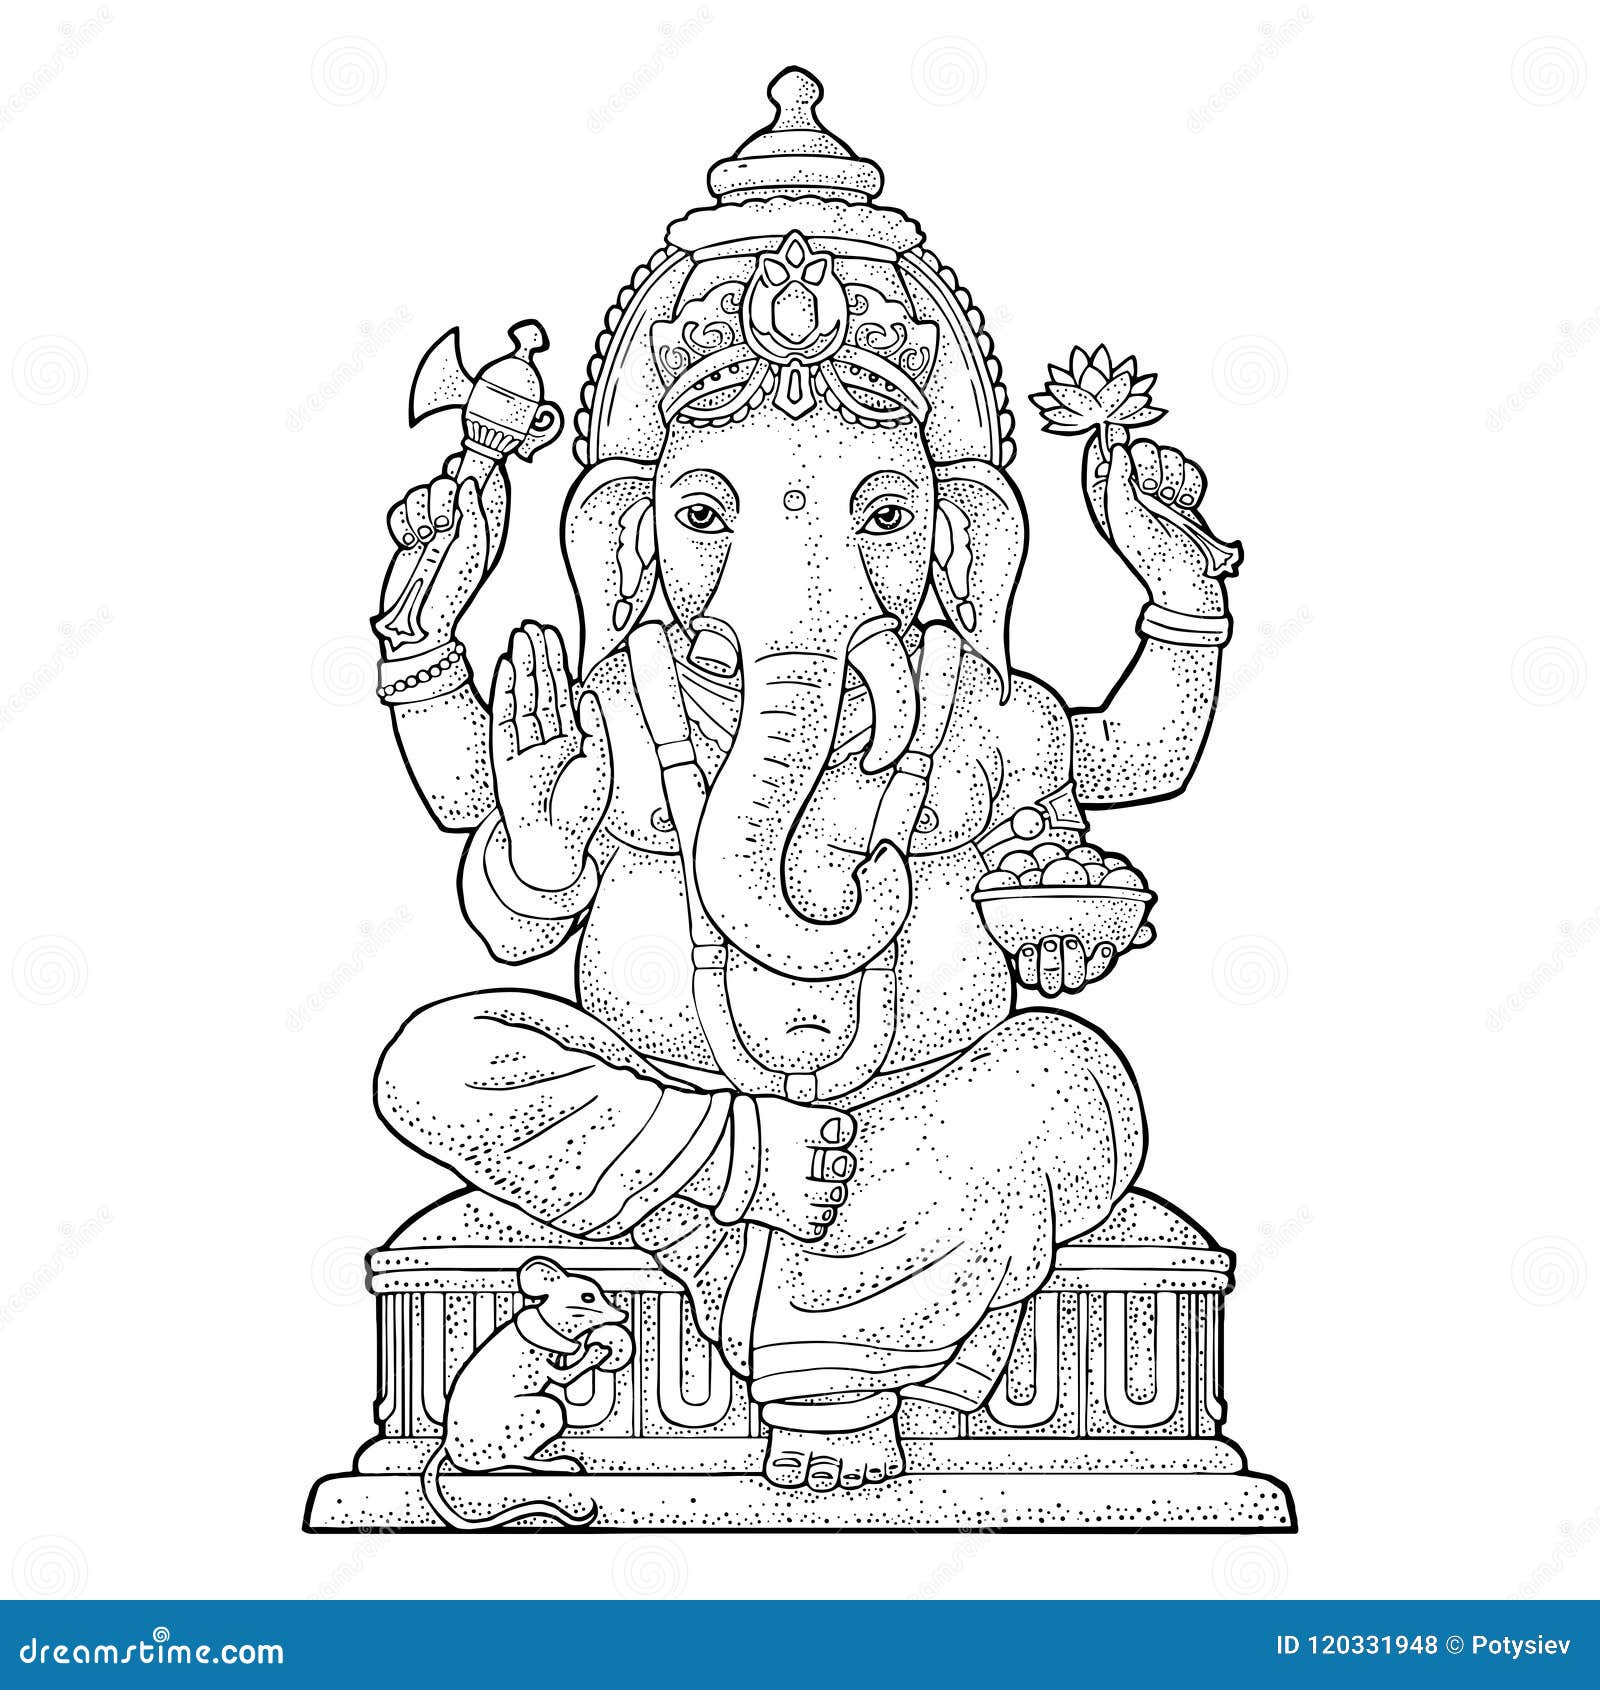 Ganpati with Mouse for Poster Ganesh Chaturthi. Engraving Vintage Vector  Stock Vector - Illustration of culture, ganpati: 120331948